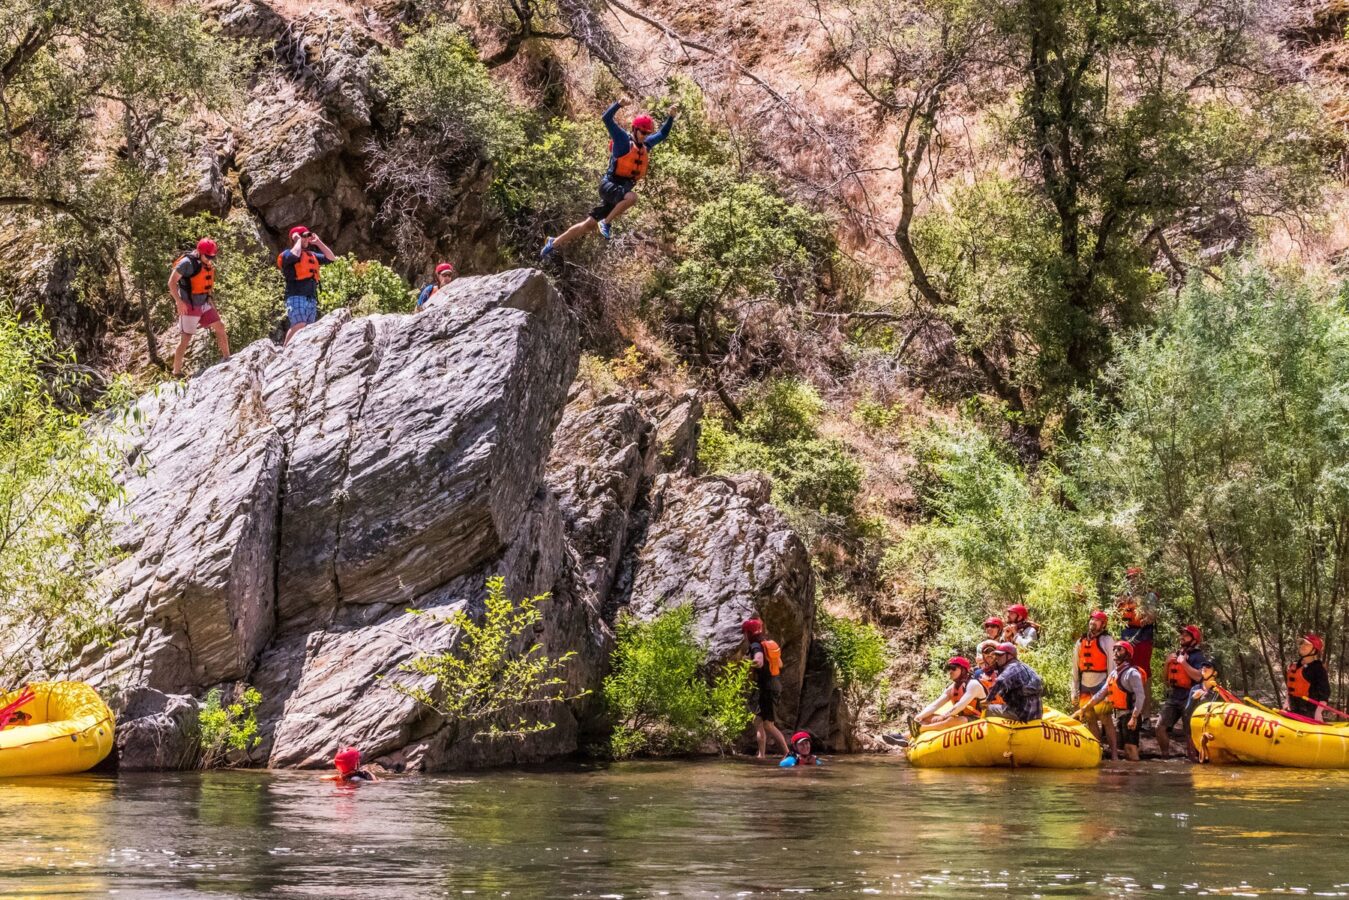 A person mid-air jumping off a rock into the Tuolumne River as a group of guests watches